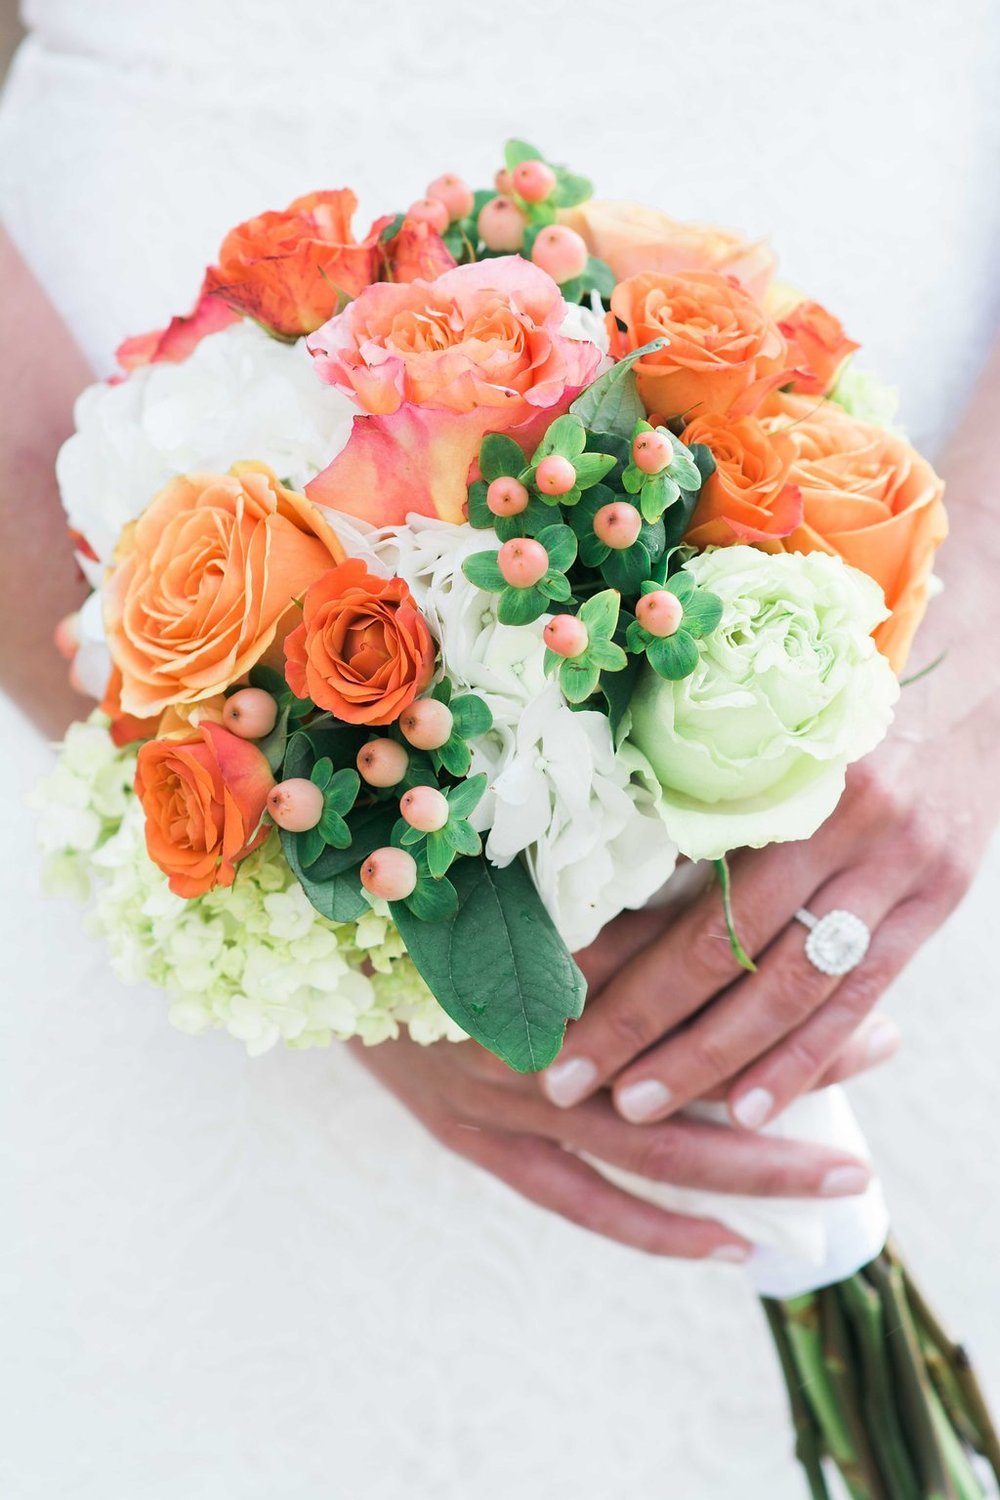 Bride holding orange and white flower bouquet on her wedding day posing for an event.jpg